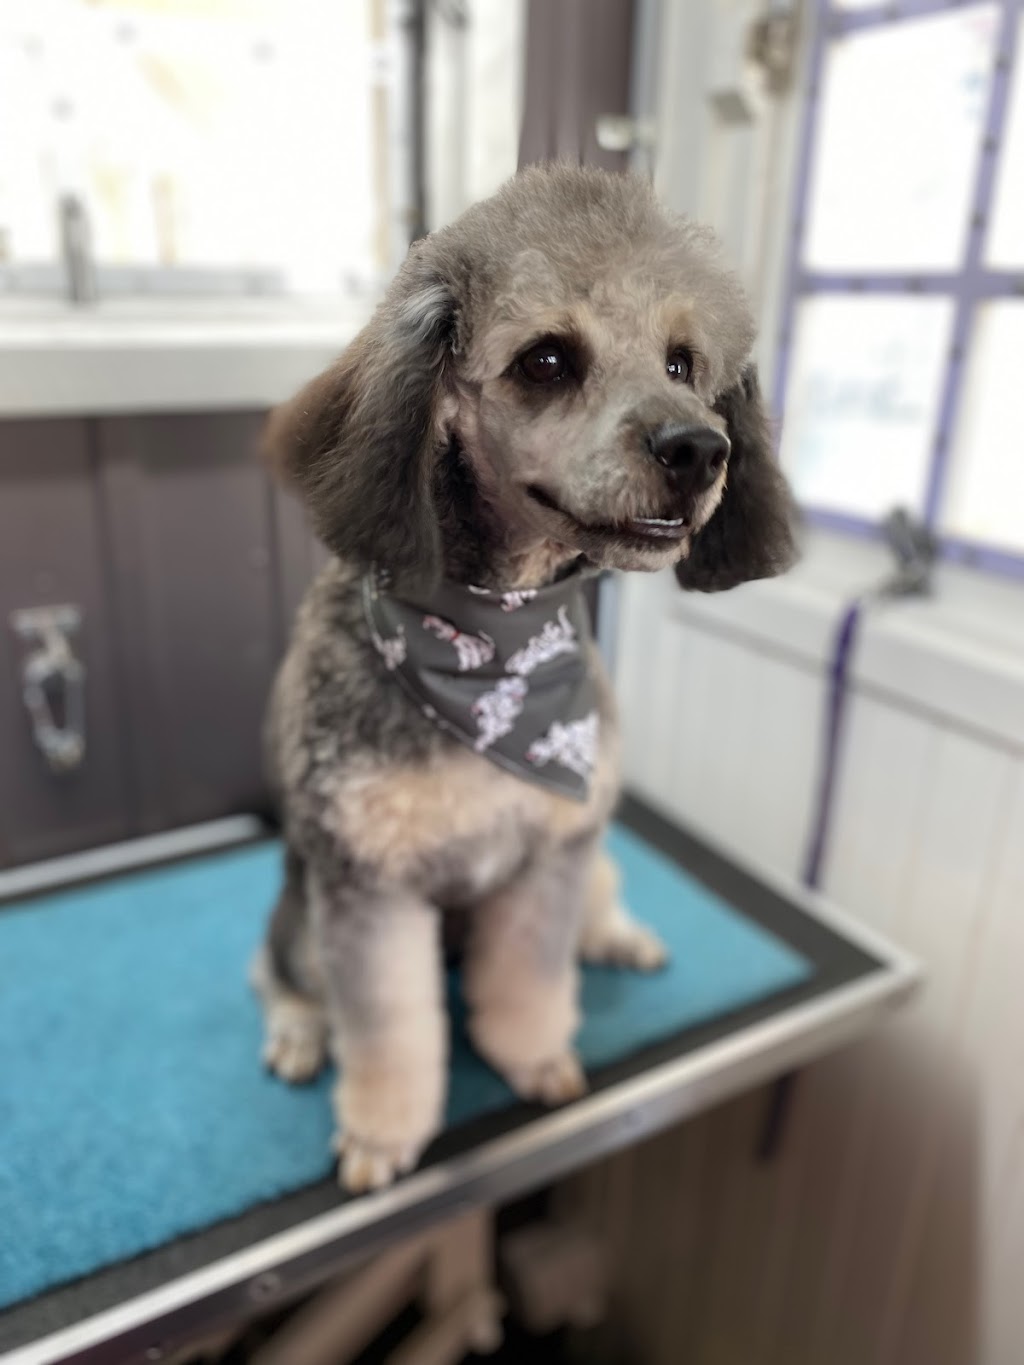 Bubbles n Bows dog wash and grooming |  | 161 Macquarie Ave, Cessnock NSW 2325, Australia | 0404493466 OR +61 404 493 466